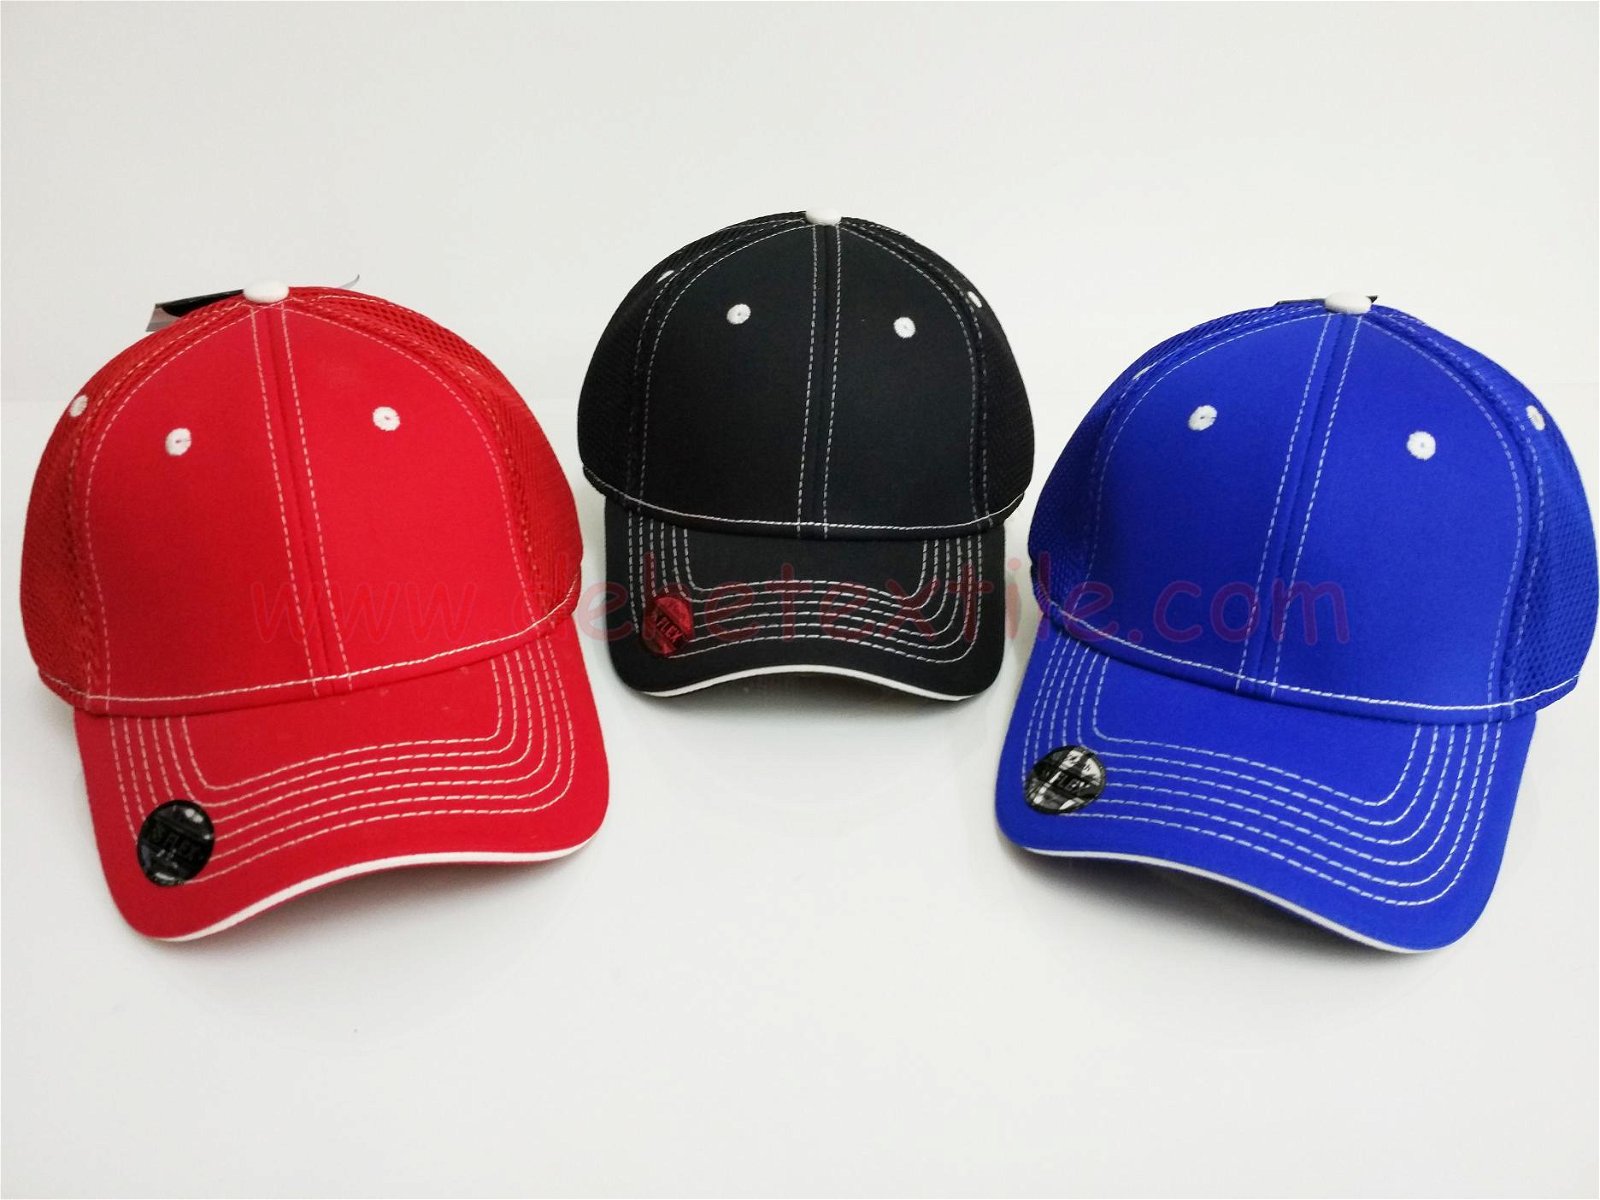  Outdoor plain Cotton wholesale Baseball blank sportscapping Caps  1